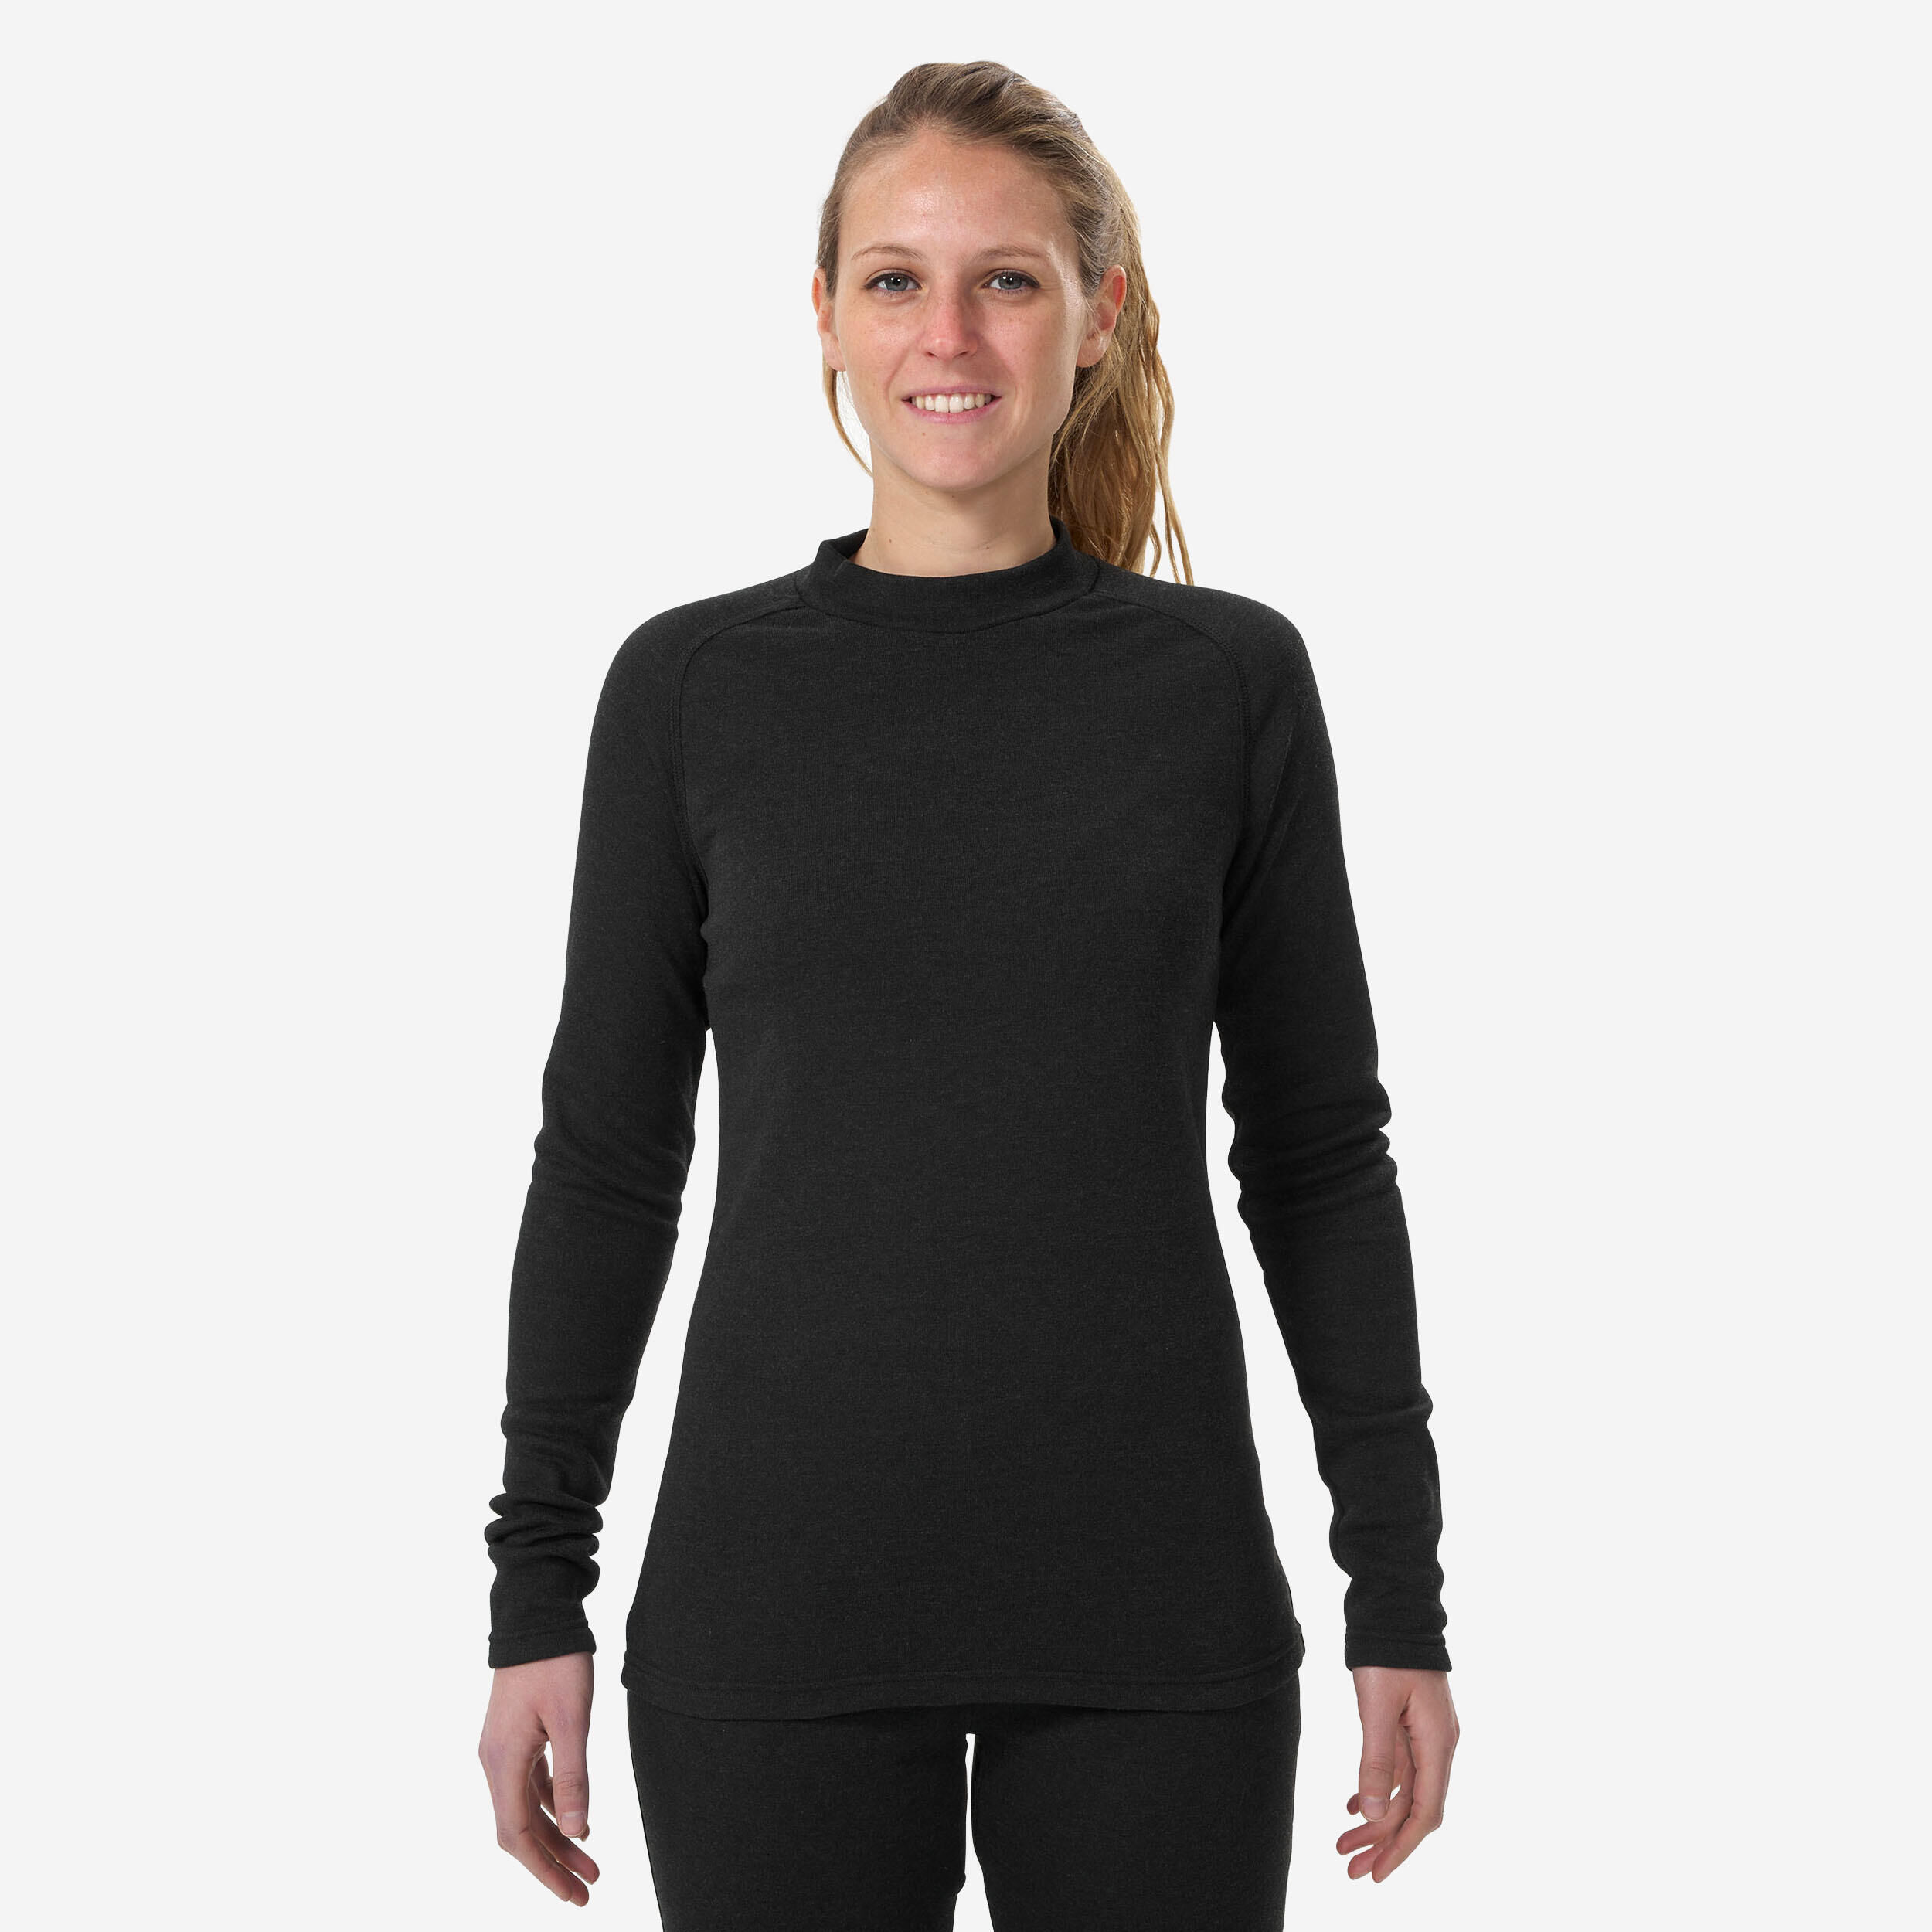 Colourful Thermal Shirt Women's Thermal Protective 